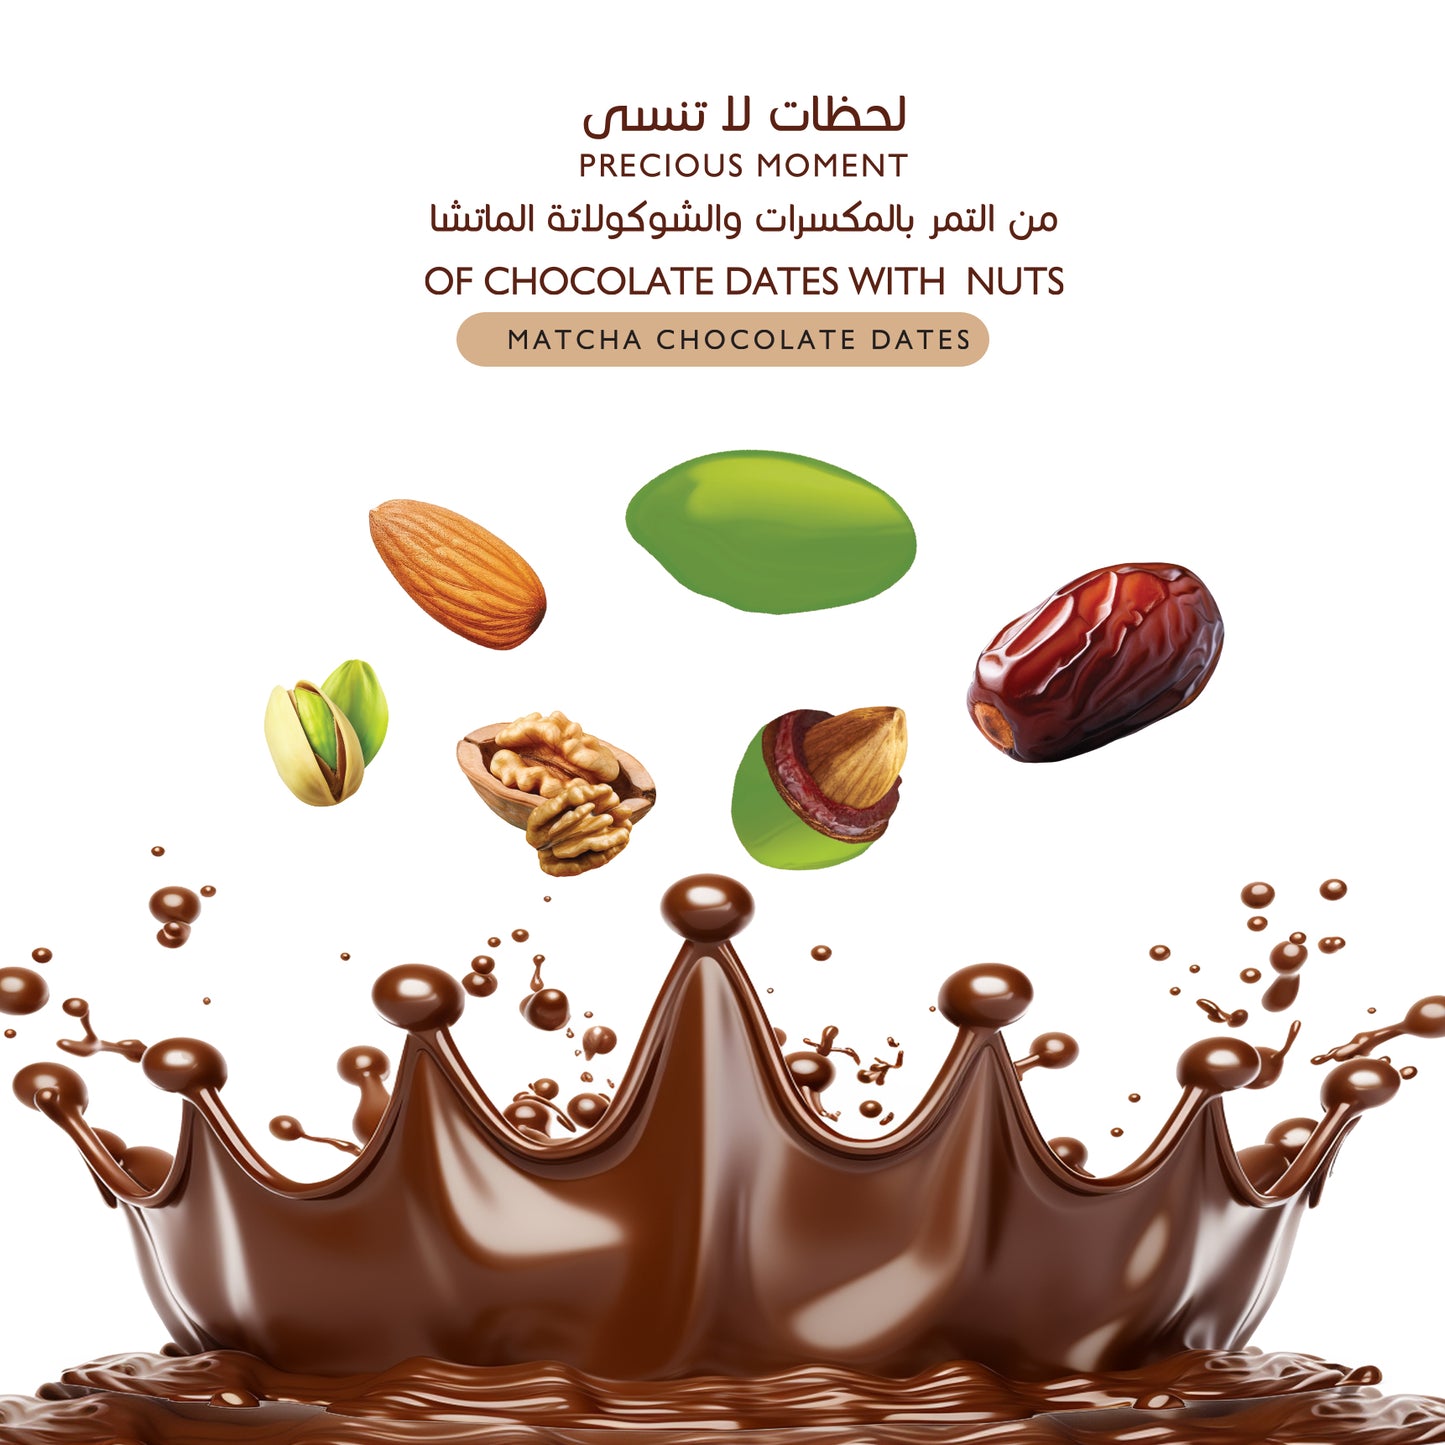 Choco Dubai 24 Packs of Full Coated Chocolate Dates Each 100 gm - SPECIAL OFFER!